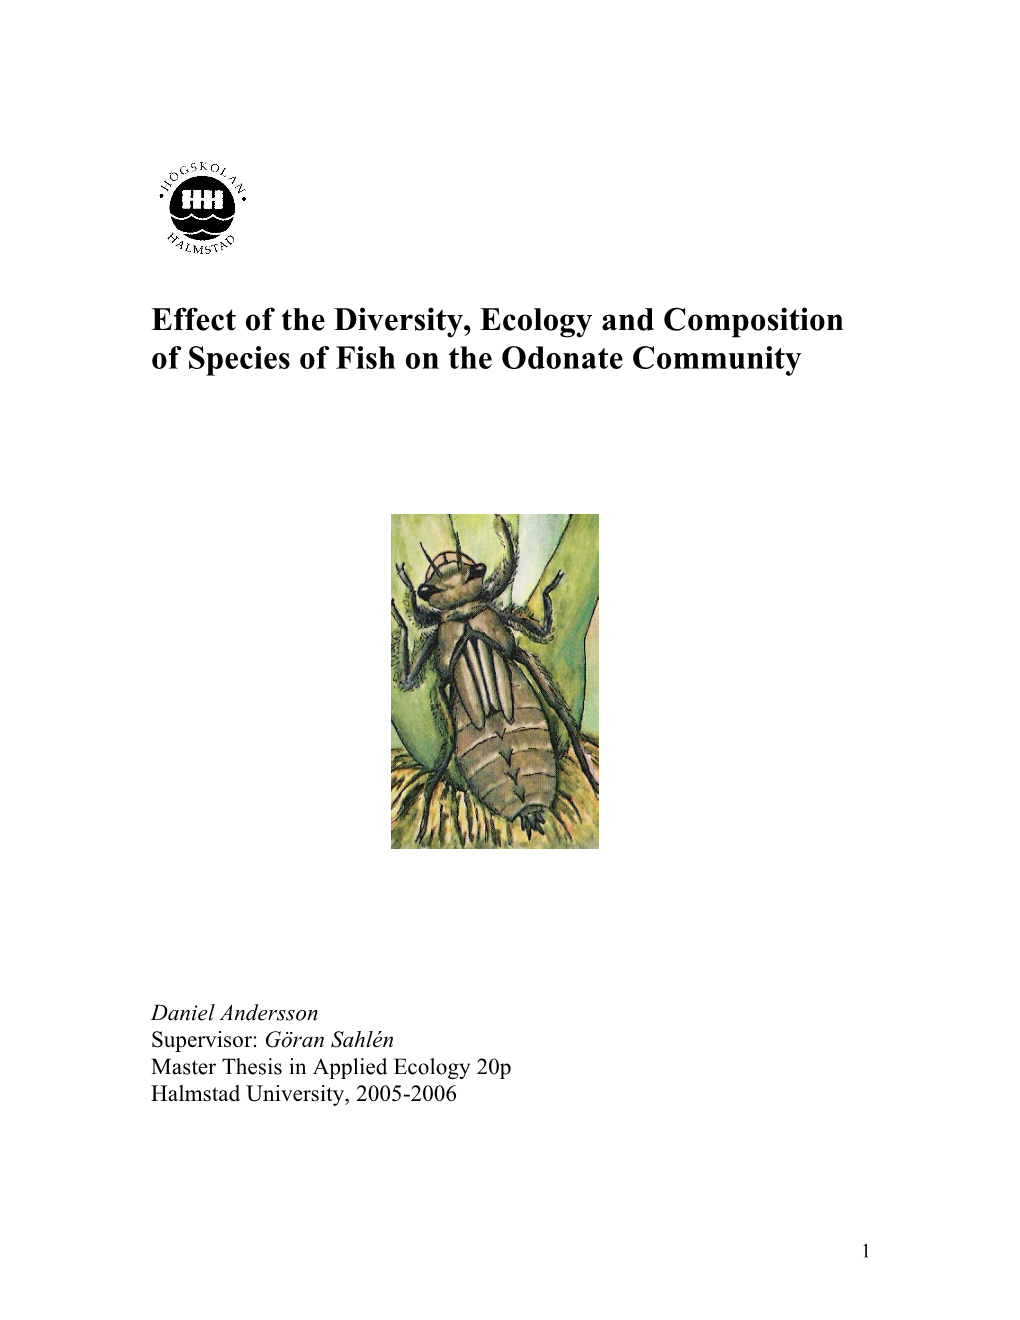 Effect of the Diversity, Ecology and Composition of Species of Fish on the Odonate Community